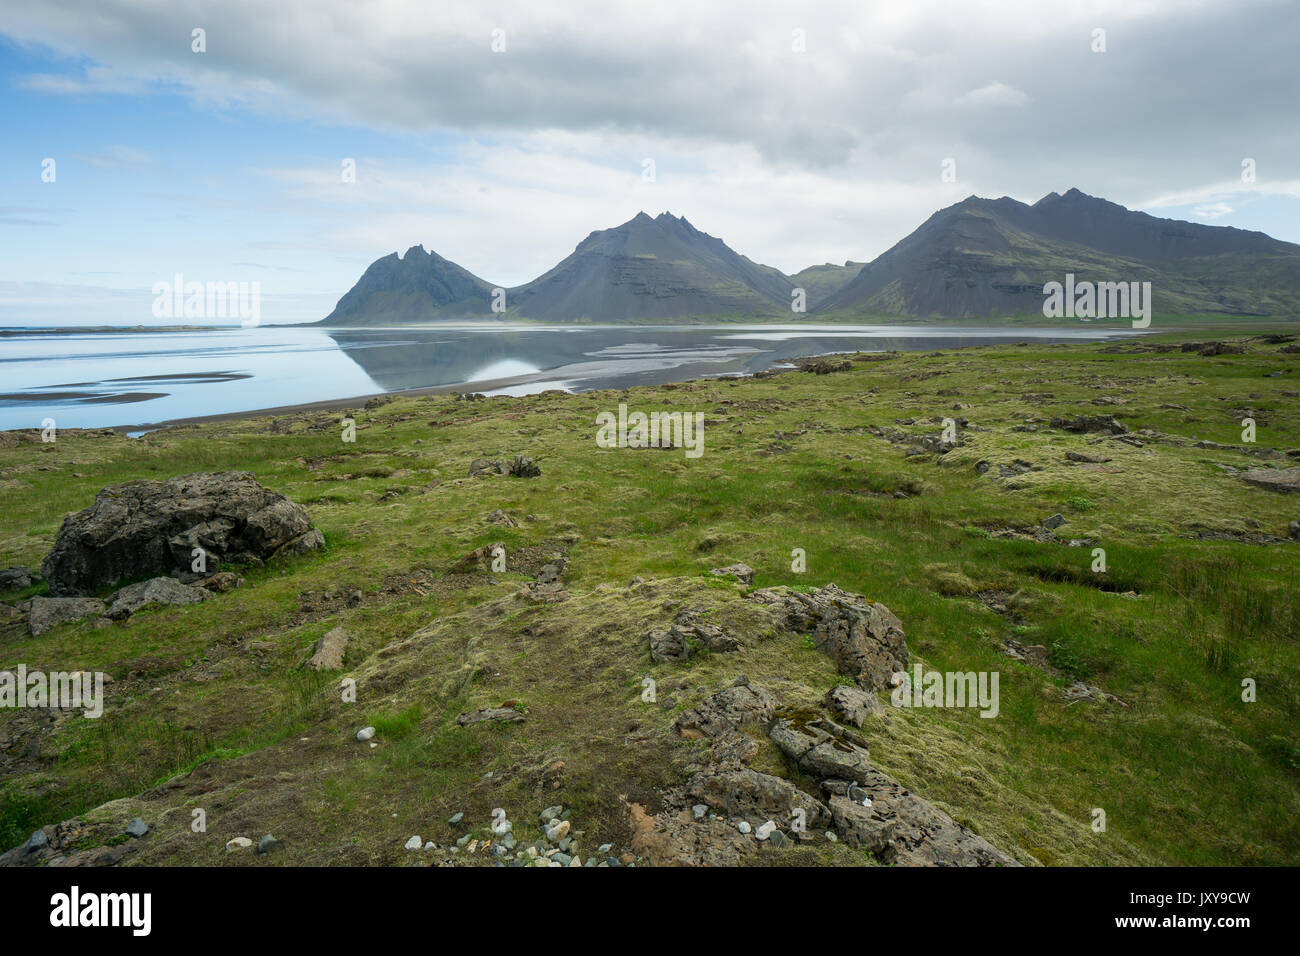 Iceland - Three mountains reflecting in silent water of lake behind green landscape Stock Photo